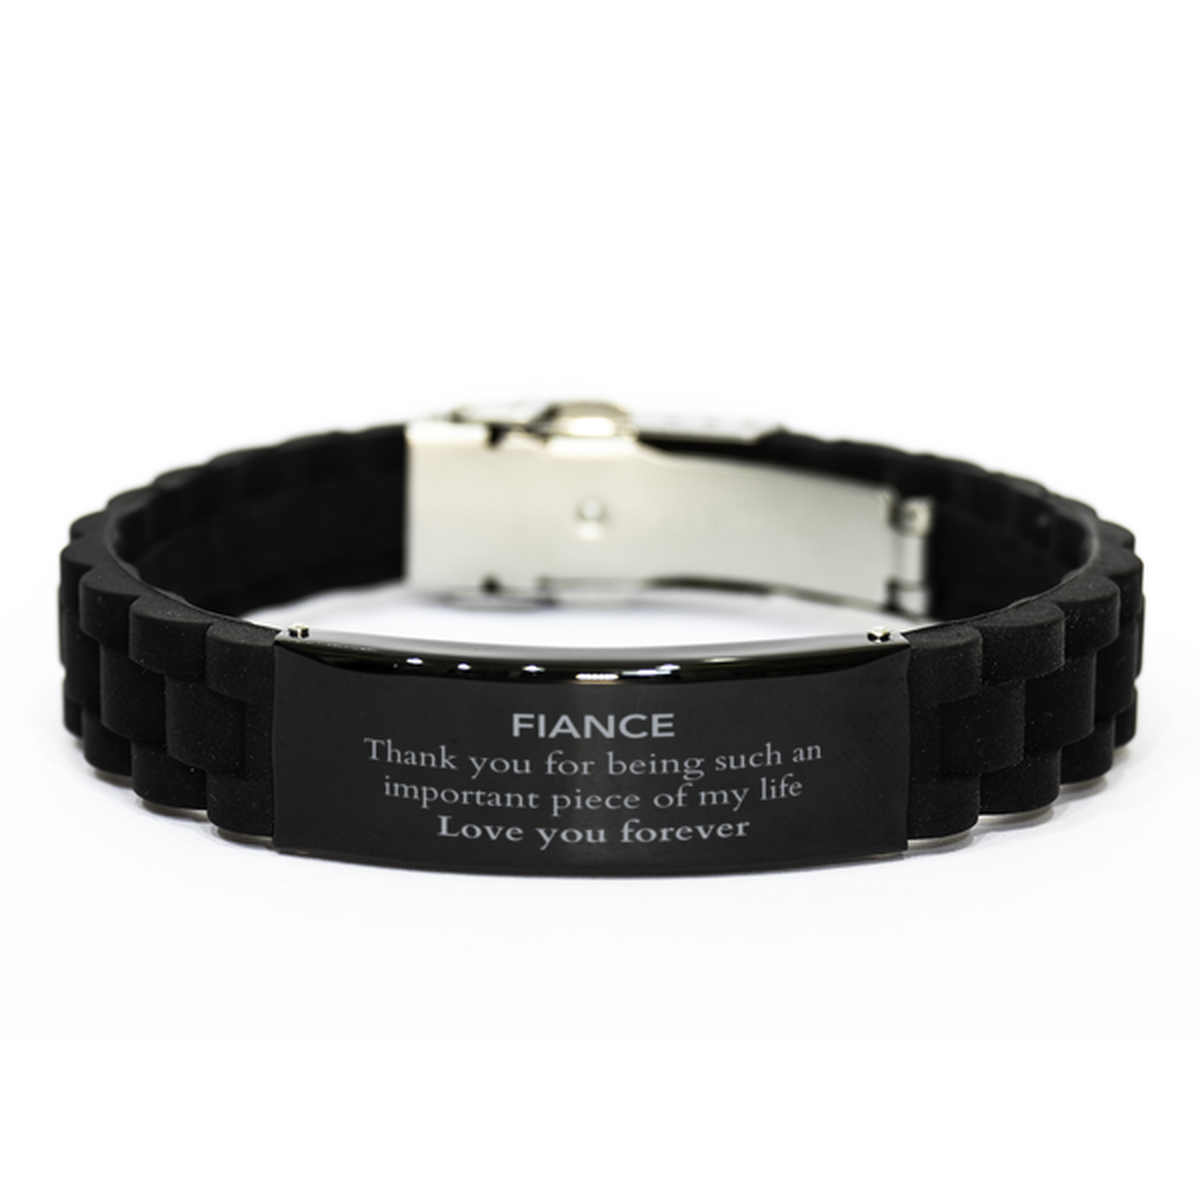 Appropriate Fiance Black Glidelock Clasp Bracelet Epic Birthday Gifts for Fiance Thank you for being such an important piece of my life Fiance Christmas Mothers Fathers Day